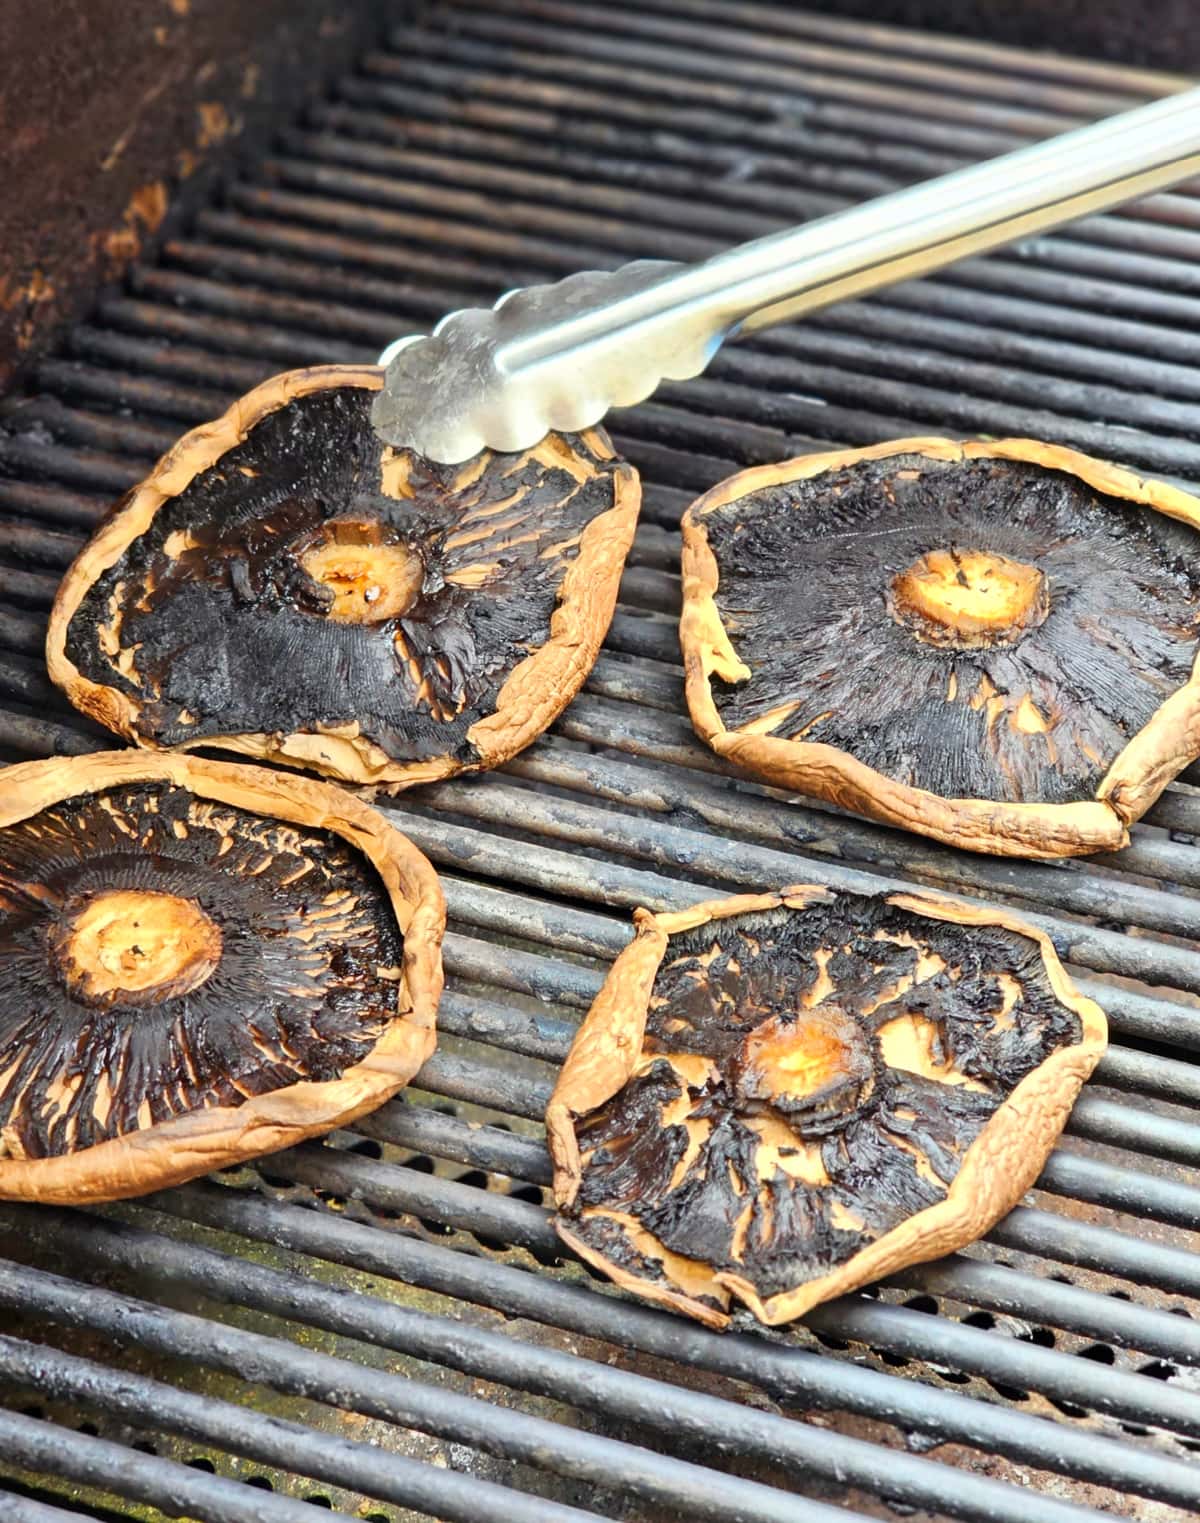 4 Portabella mushrooms on the grill with a metal tongs holding the edge of one. 